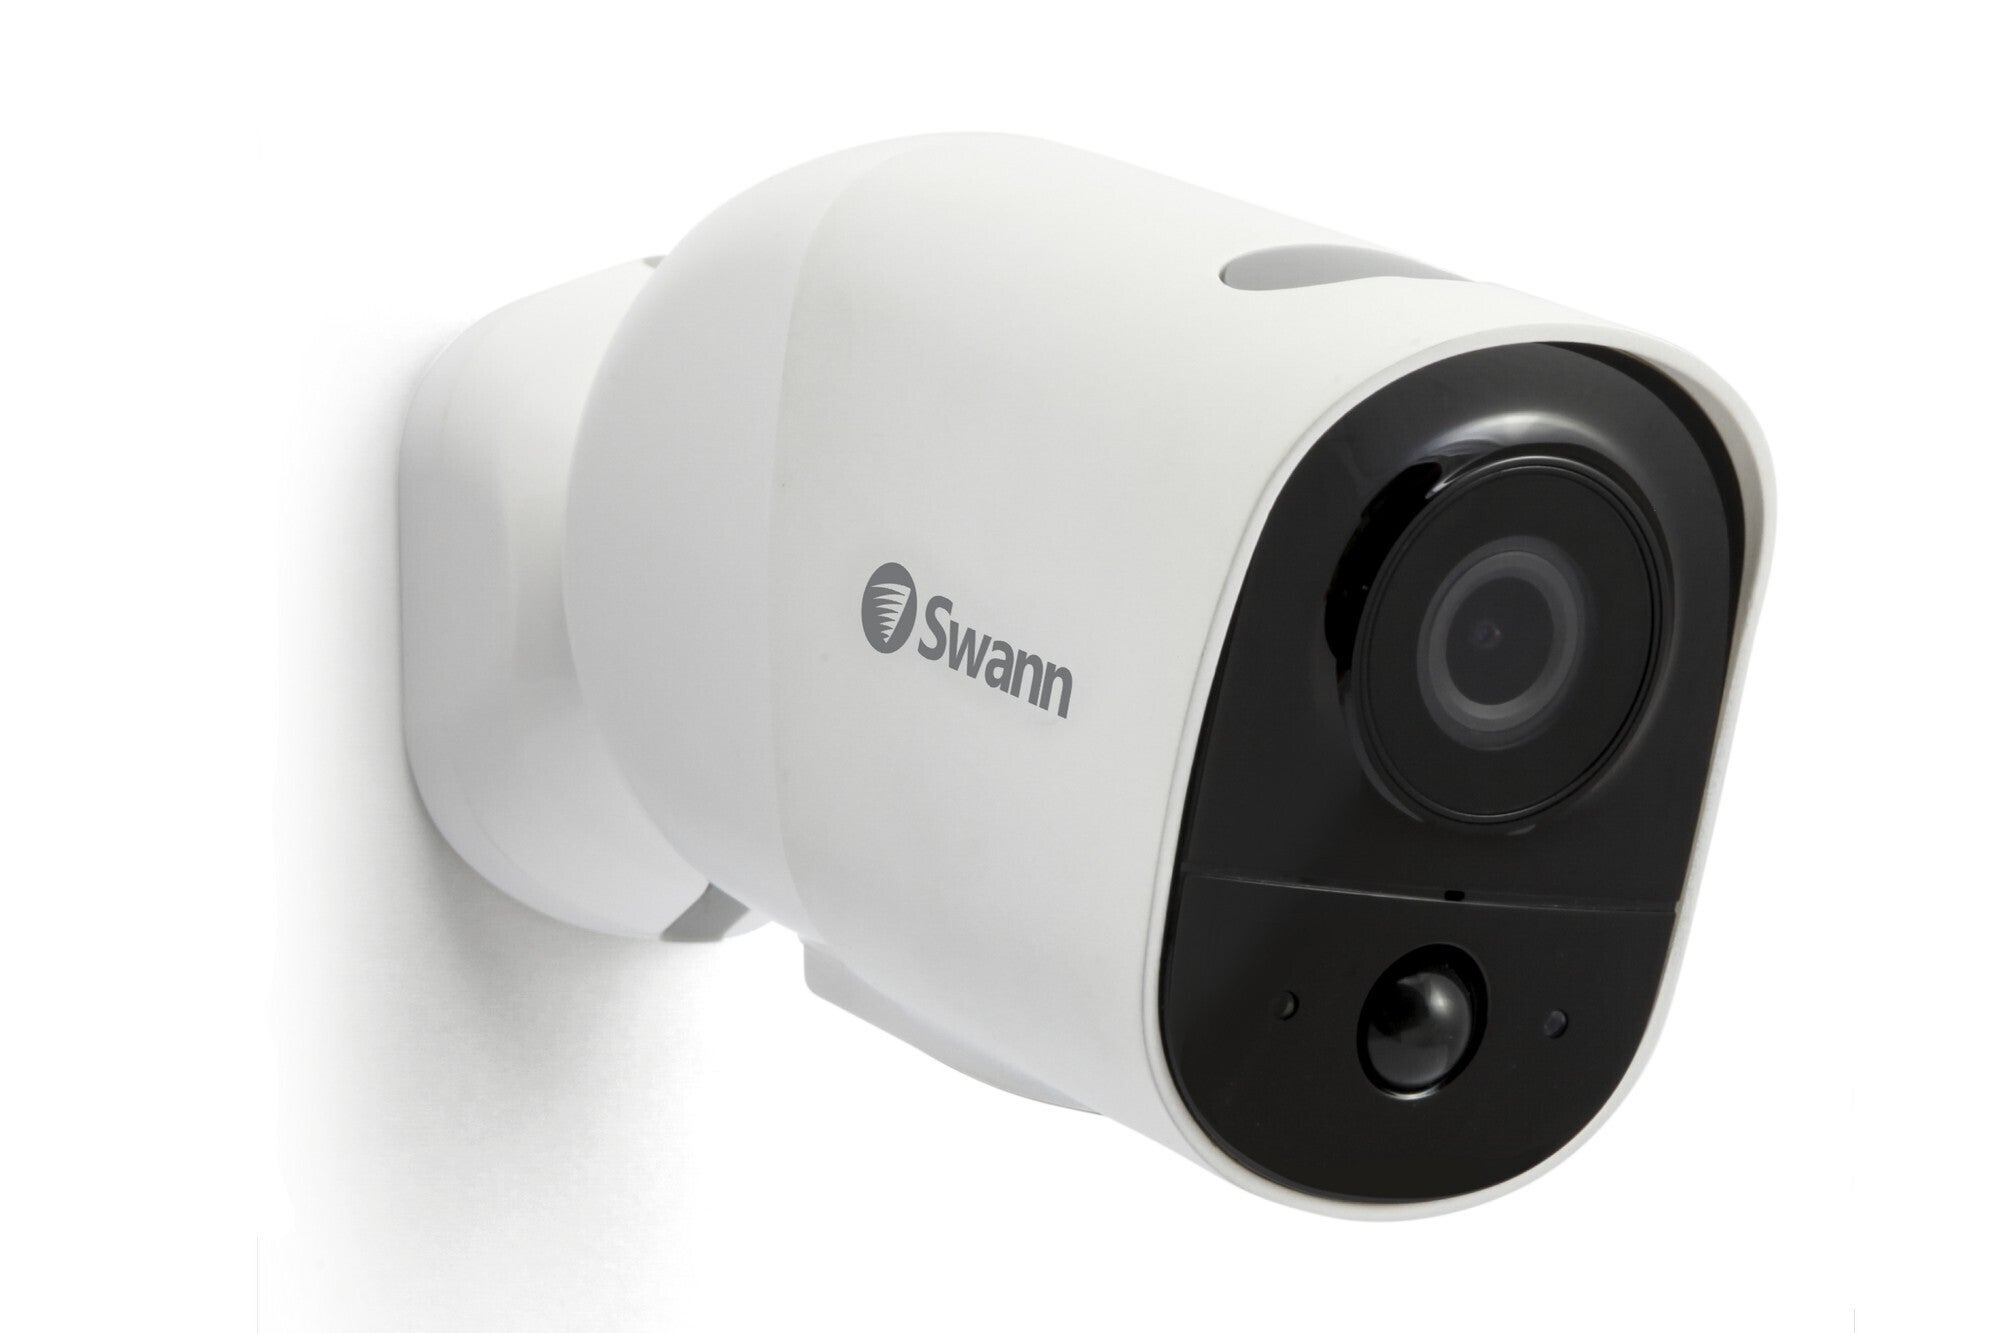 Swann Xtreem Wireless security camera review: Solid hardware | TechHive